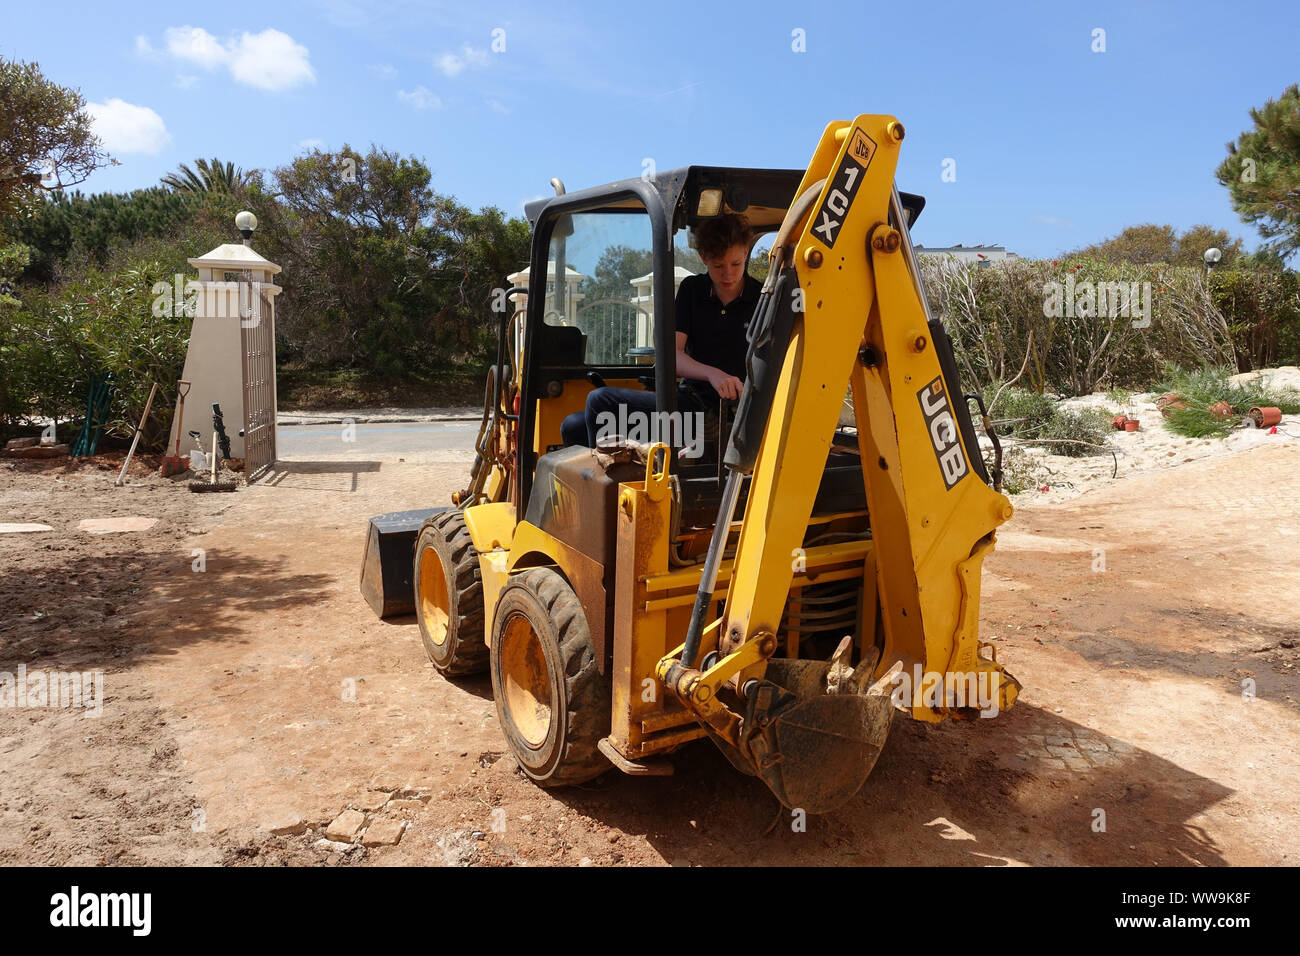 Algarve, Portugal 10 April 2019: A JCB mini digger being used to do landscaping work in a front garden Stock Photo